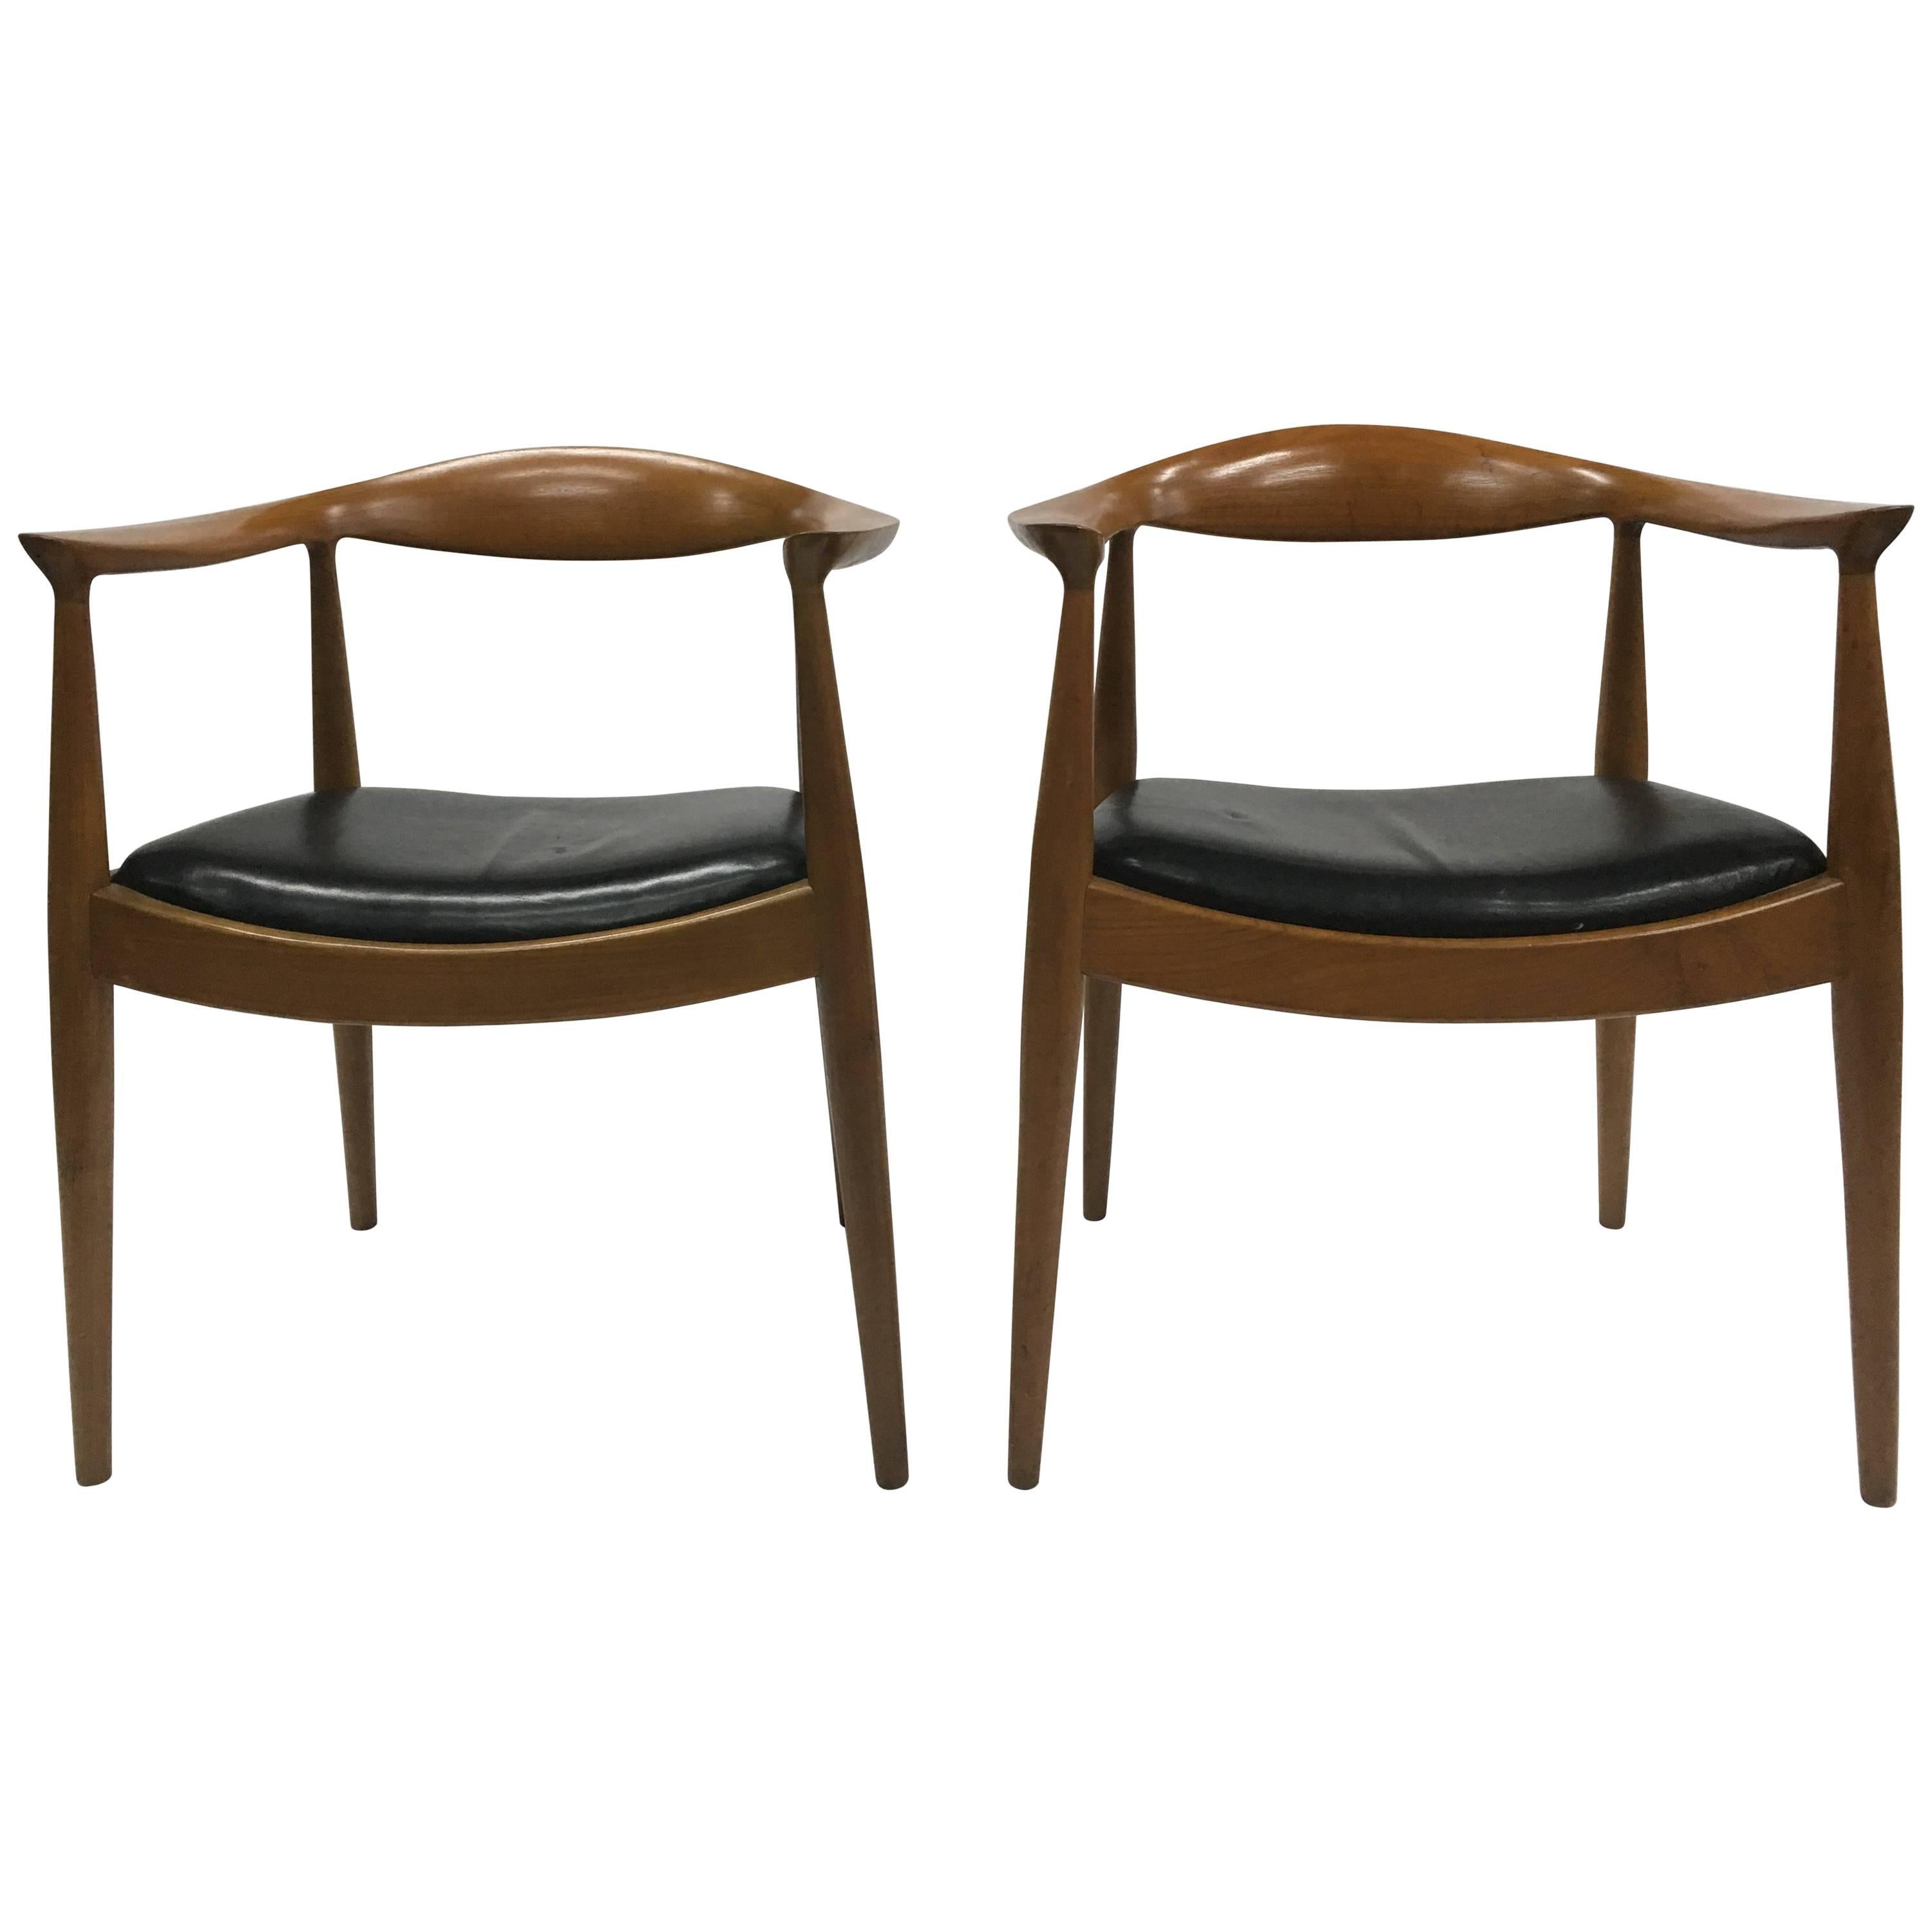 Pair of Chairs by Danish Deluxe, 1960s For Sale